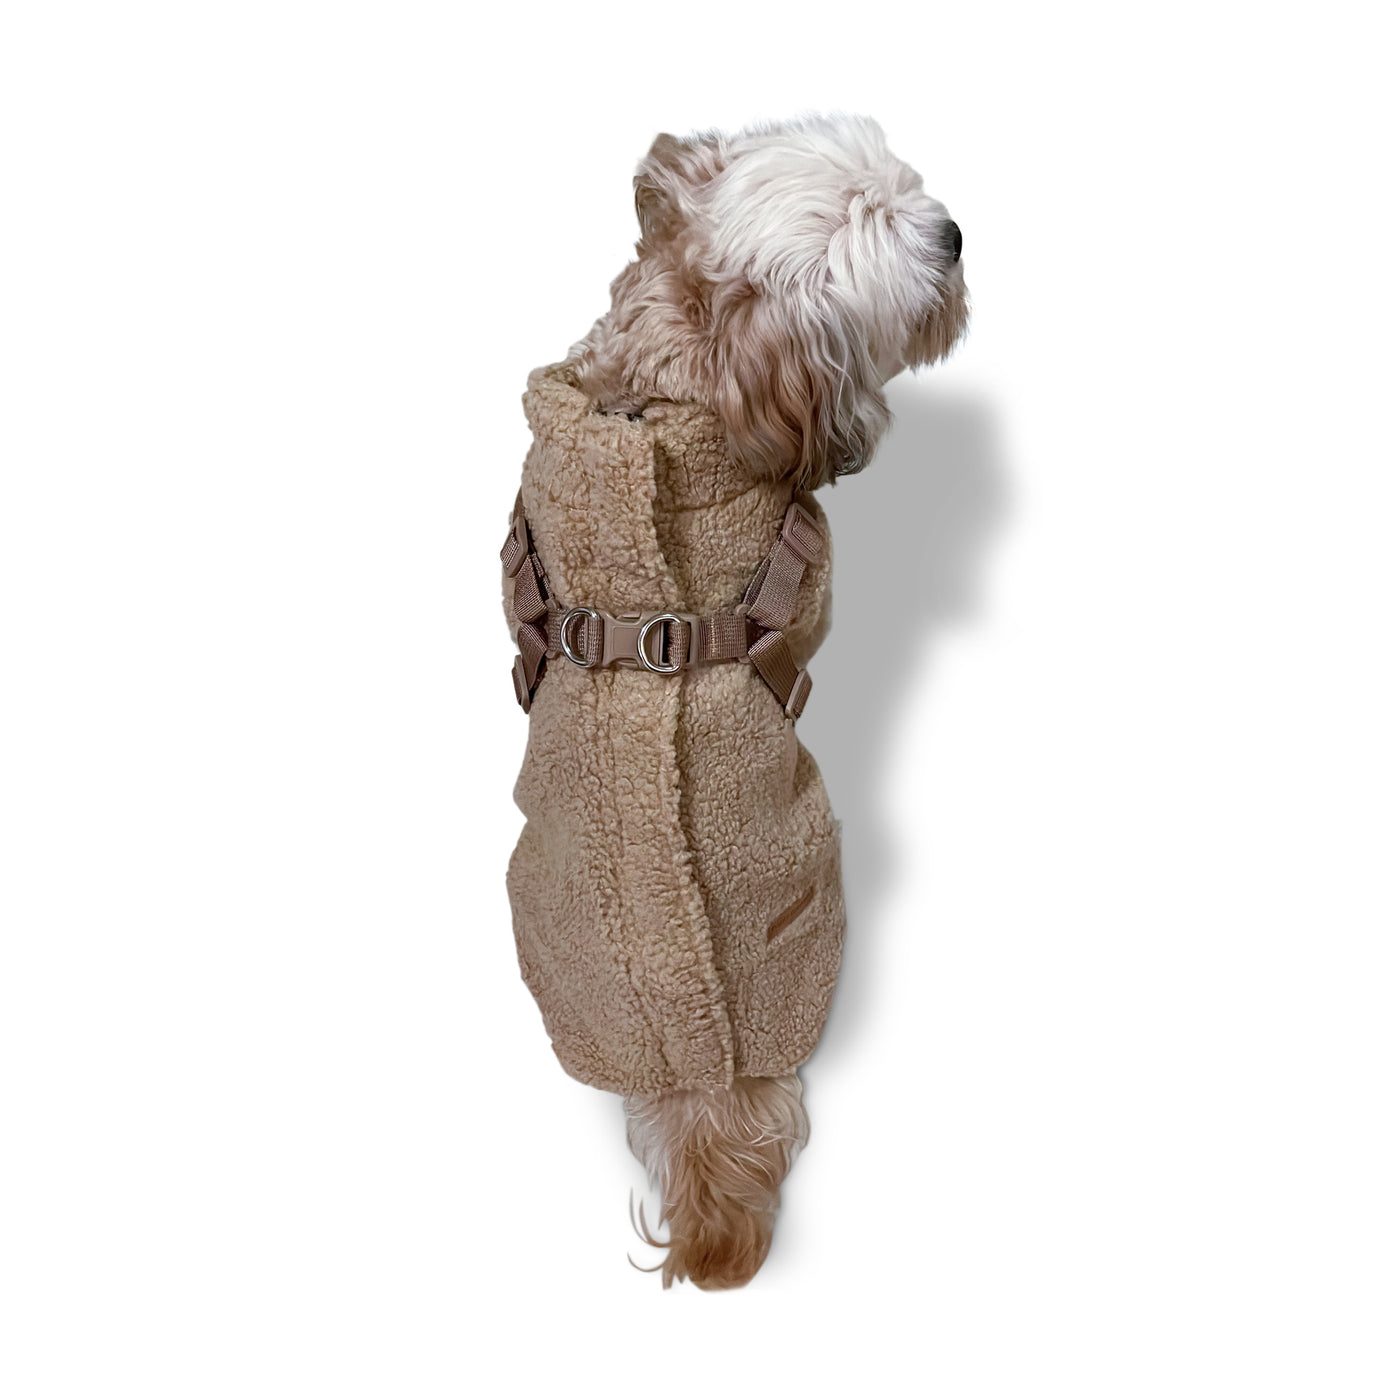 NEW Teddy coat with harness